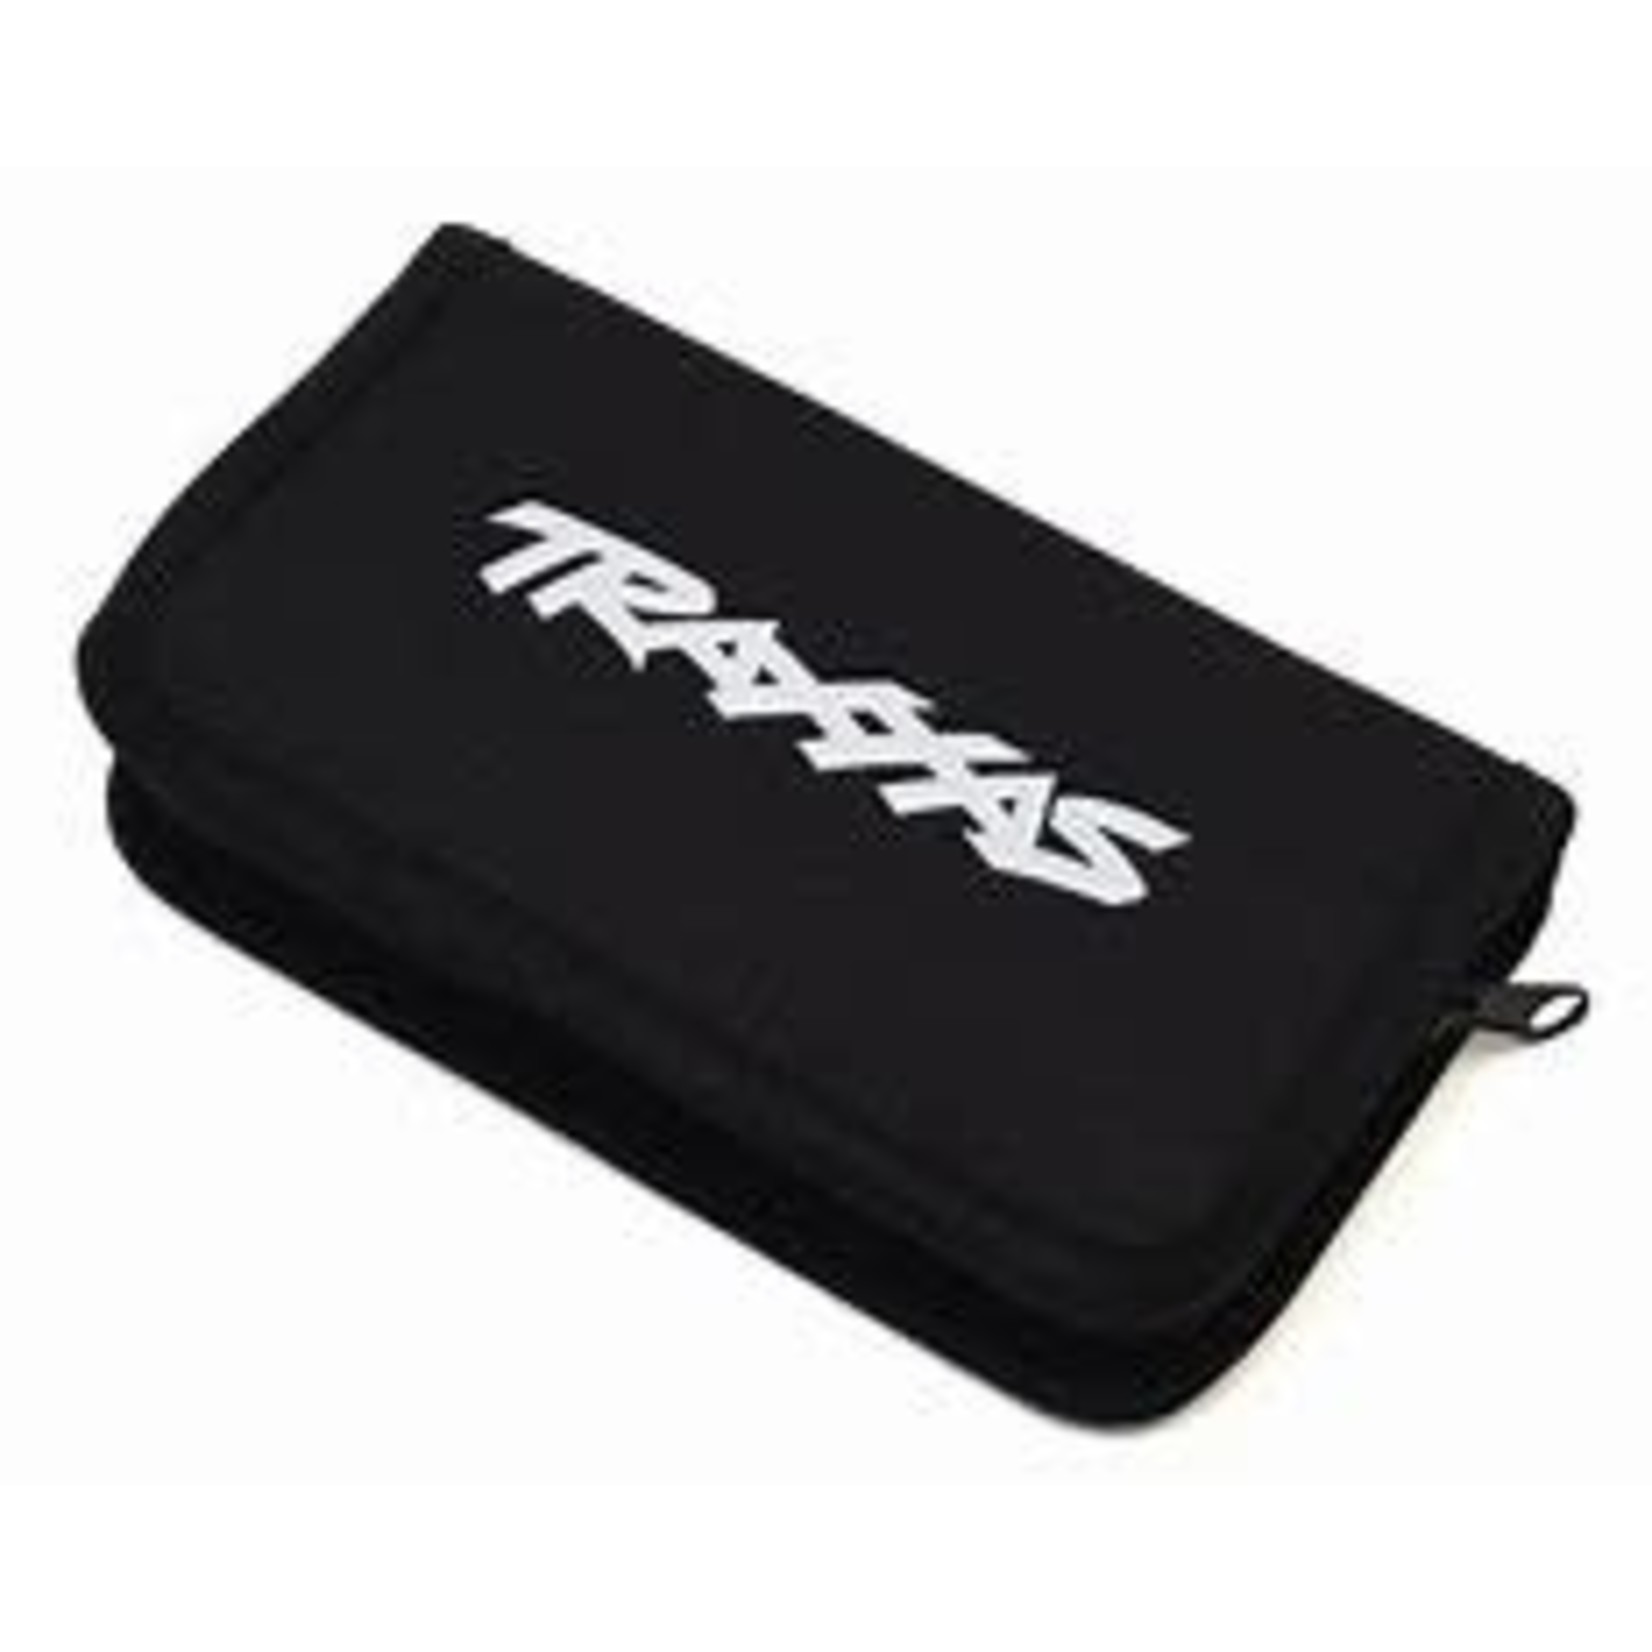 Traxxas Tool Set with Carrying Case